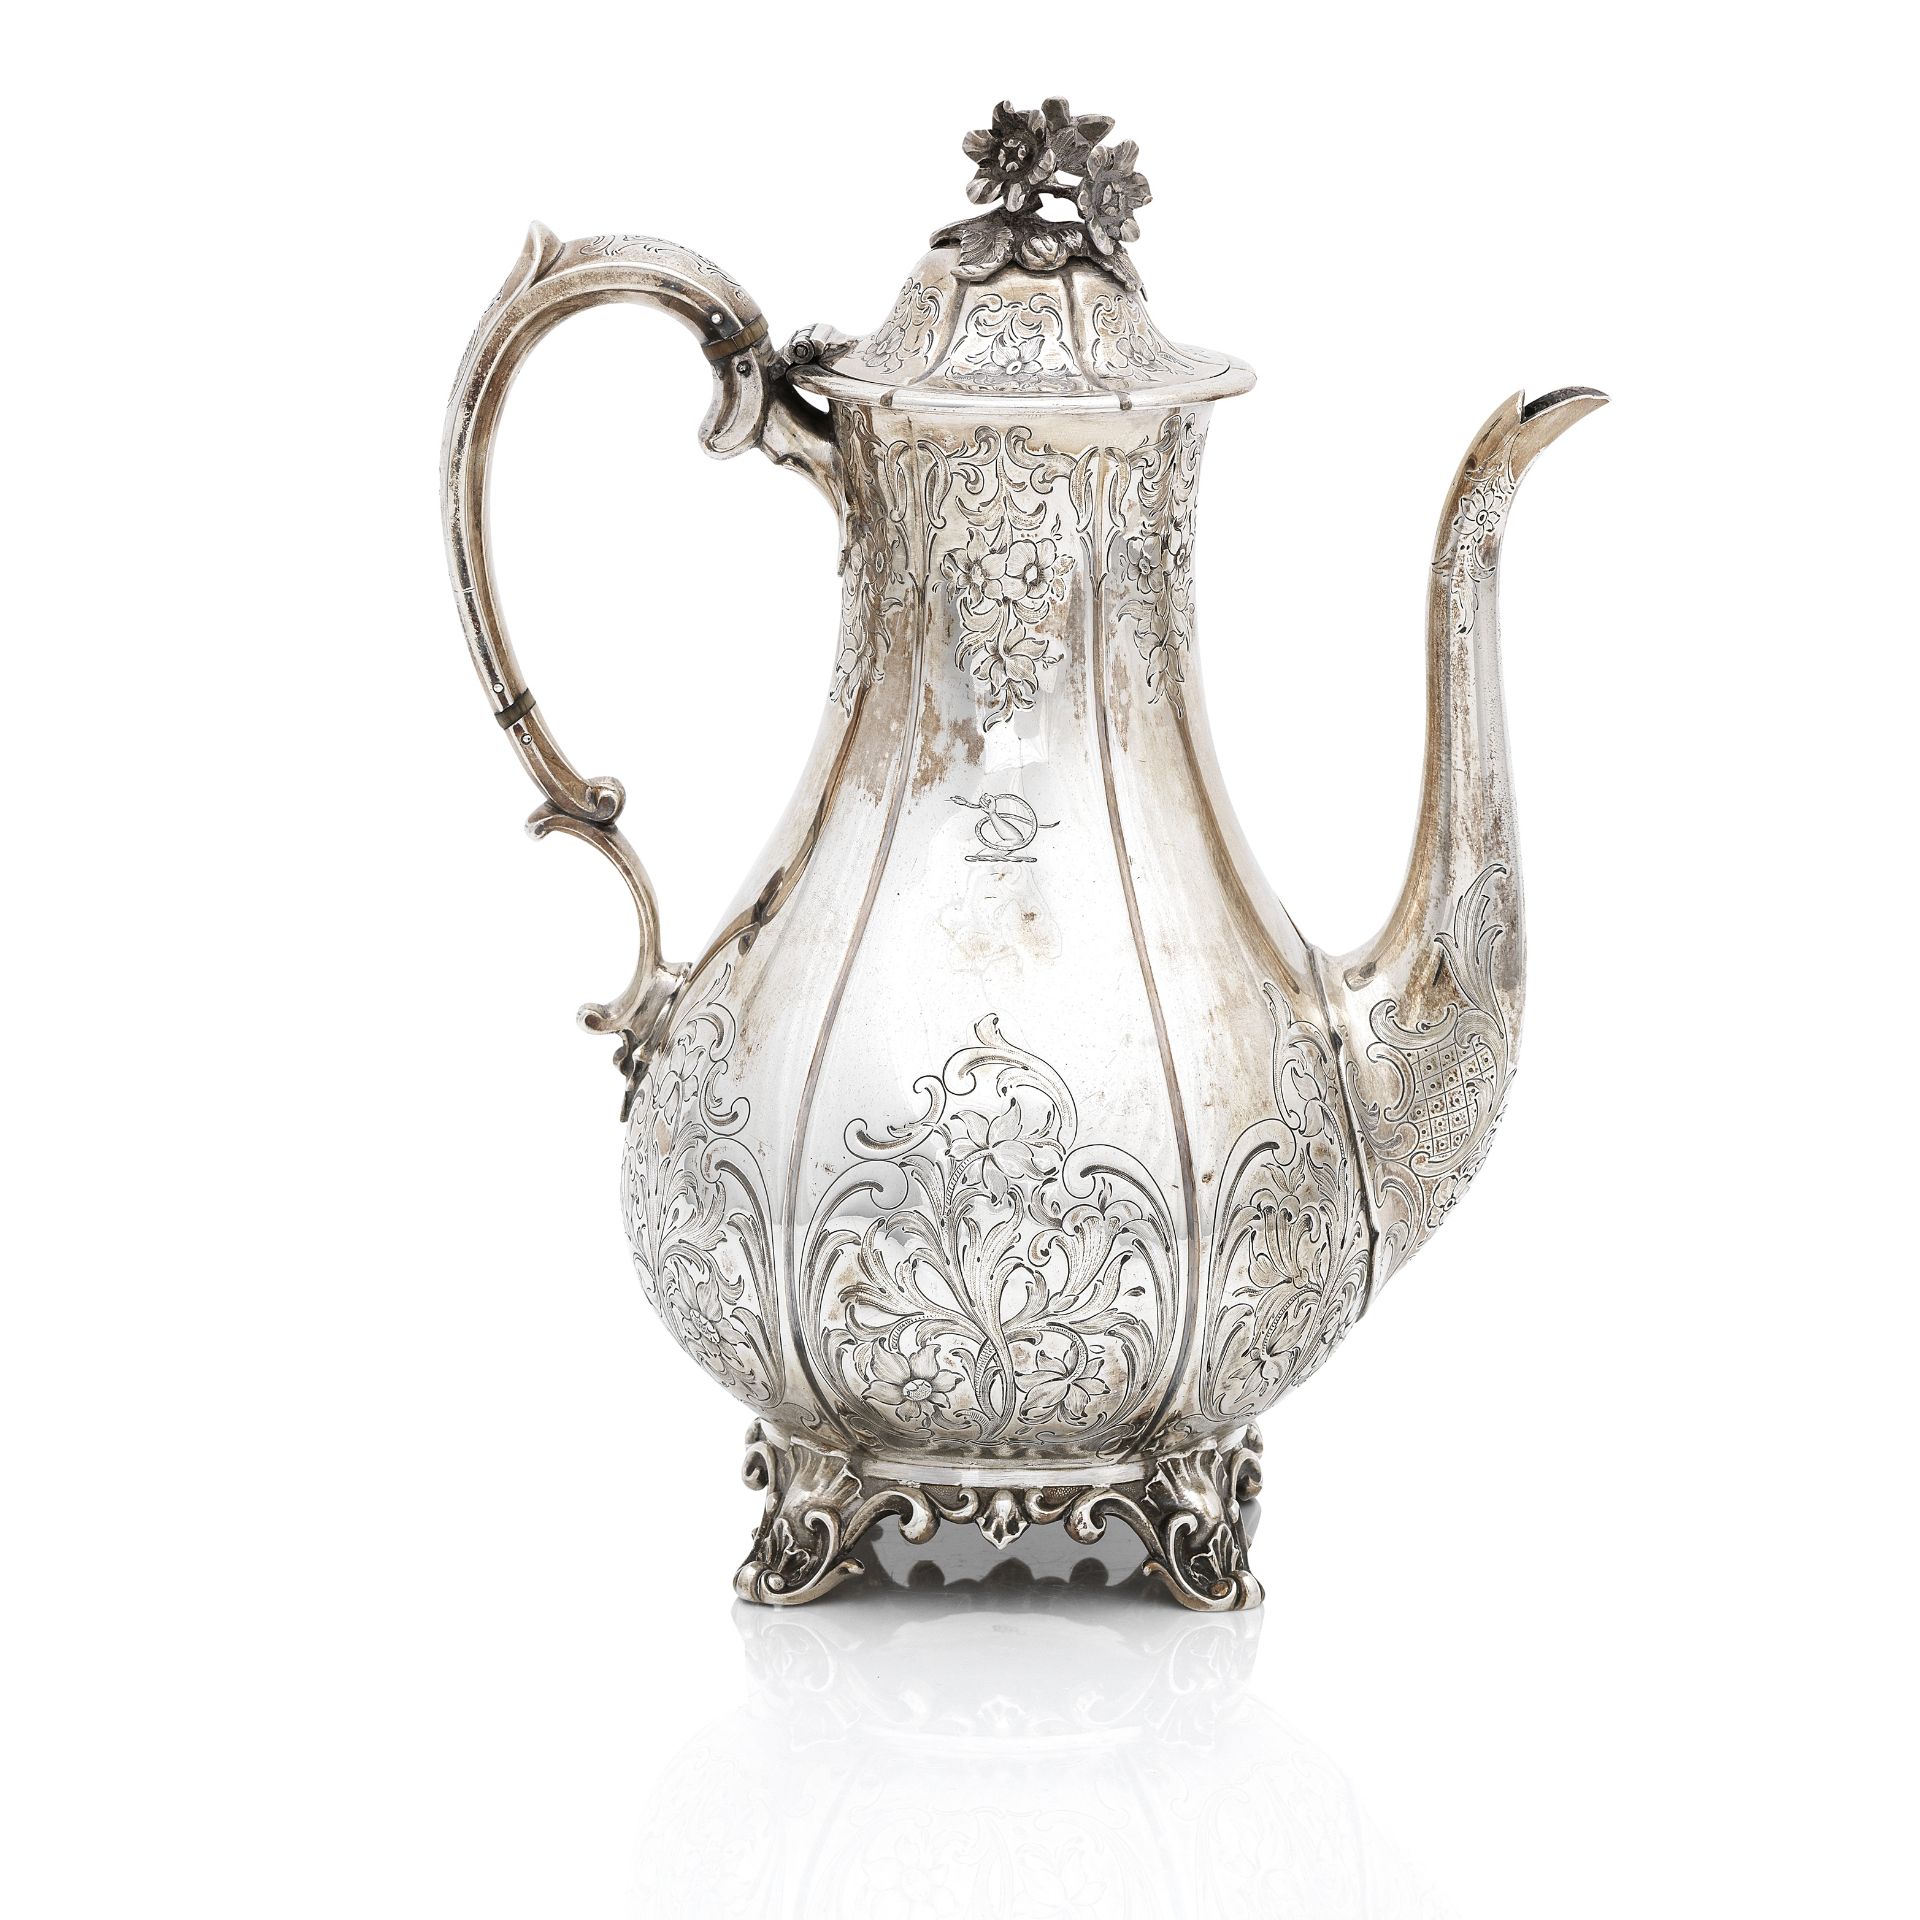 A Victorian silver coffee pot by Charles Reily and George Storer, London 1849